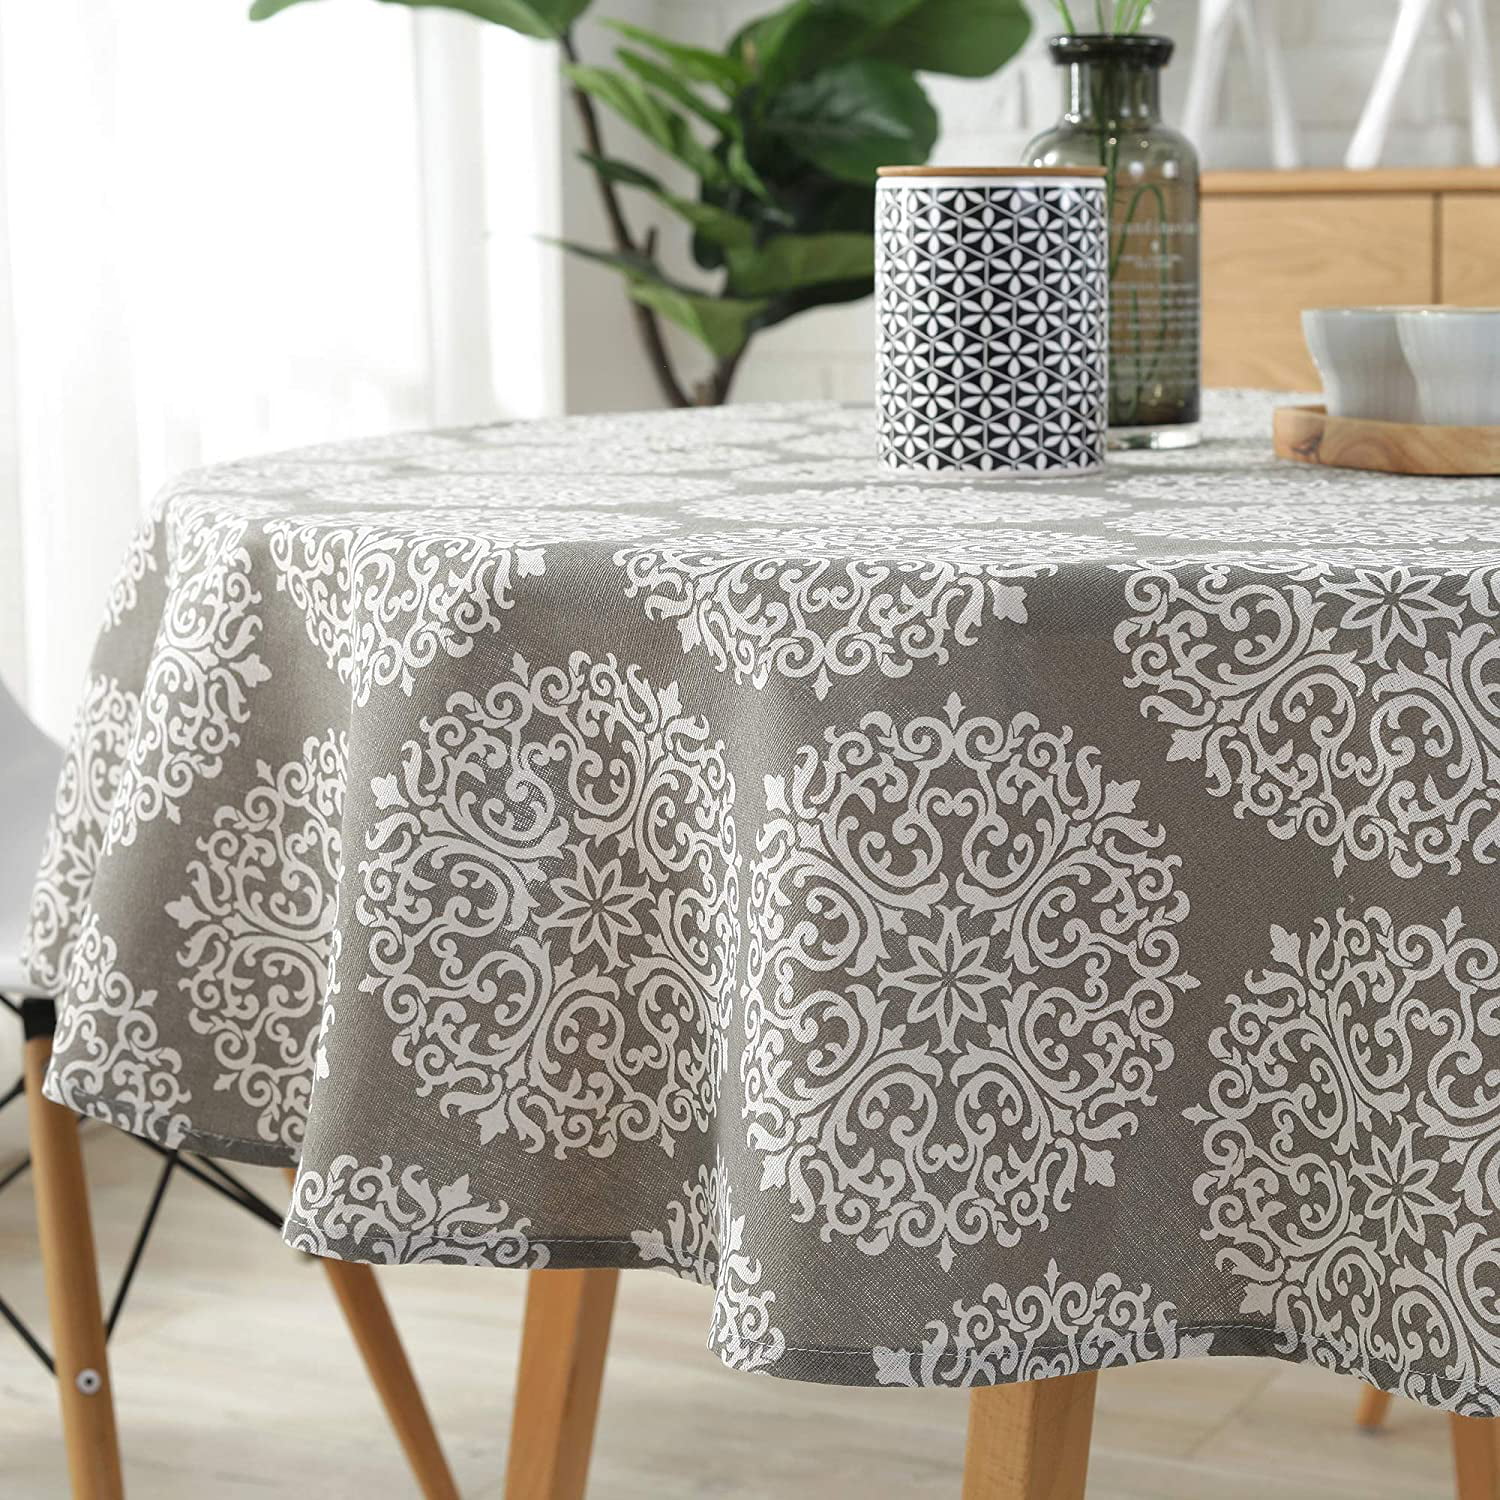 ColorBird Solid Color Tassel Tablecloth Cotton Linen Dust-Proof Table Cover for Kitchen Dinning Tabletop Decoration Round, 60 Inch, Light Gray 